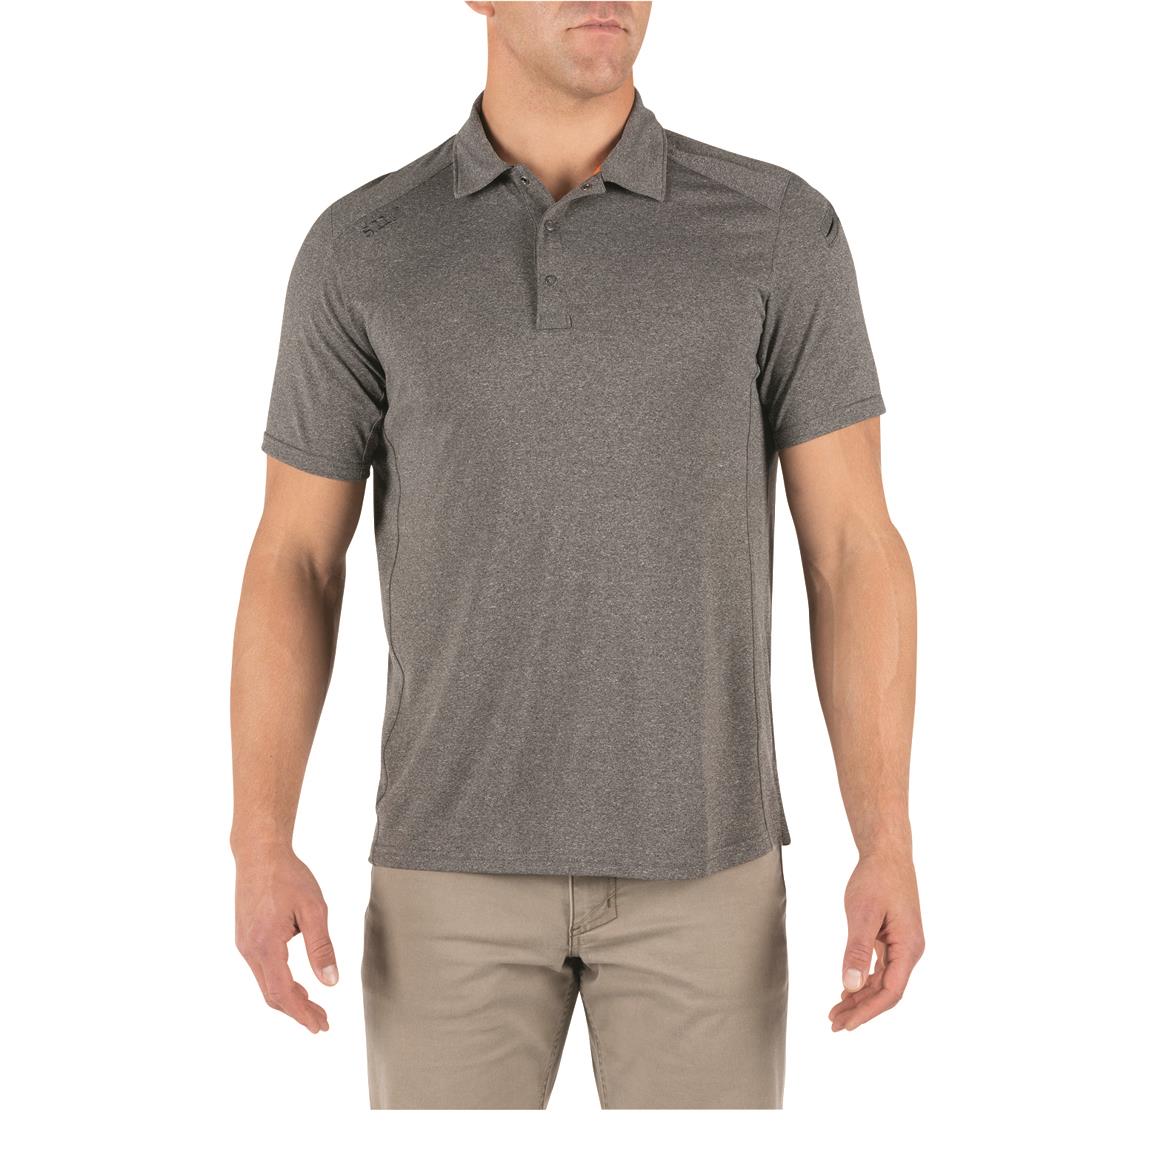 5.11 Tactical Paramount Short-sleeved Polo Shirt, Charcoal Heather